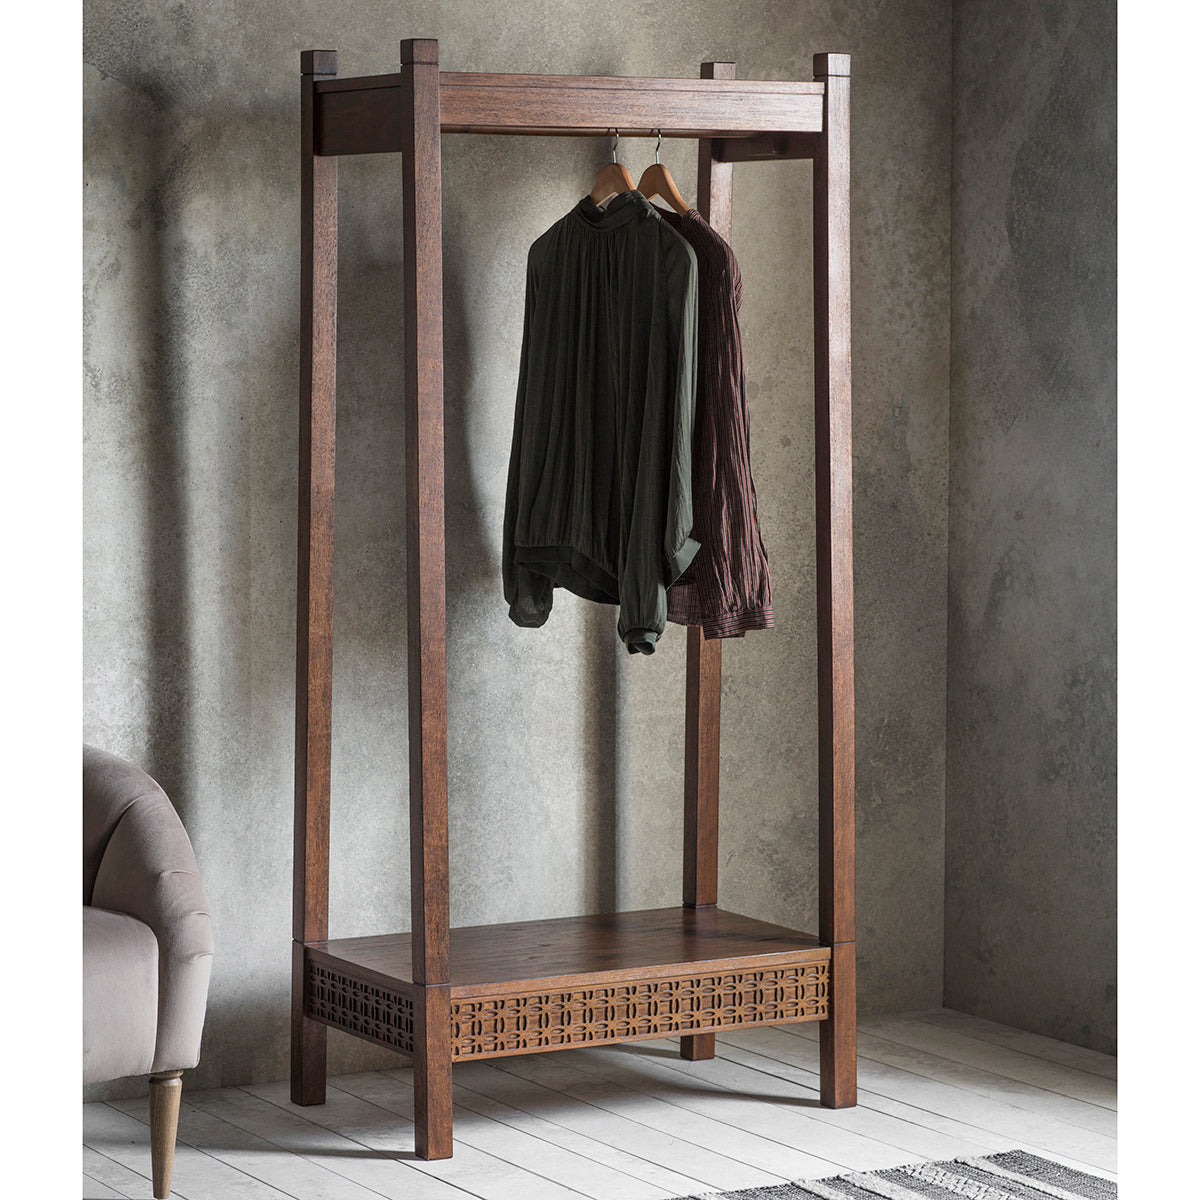 A home furniture piece, the Dartington Retreat Open Wardrobe 800x500x1740mm from Kikiathome.co.uk enhances interior decor with clothes hanging on it.